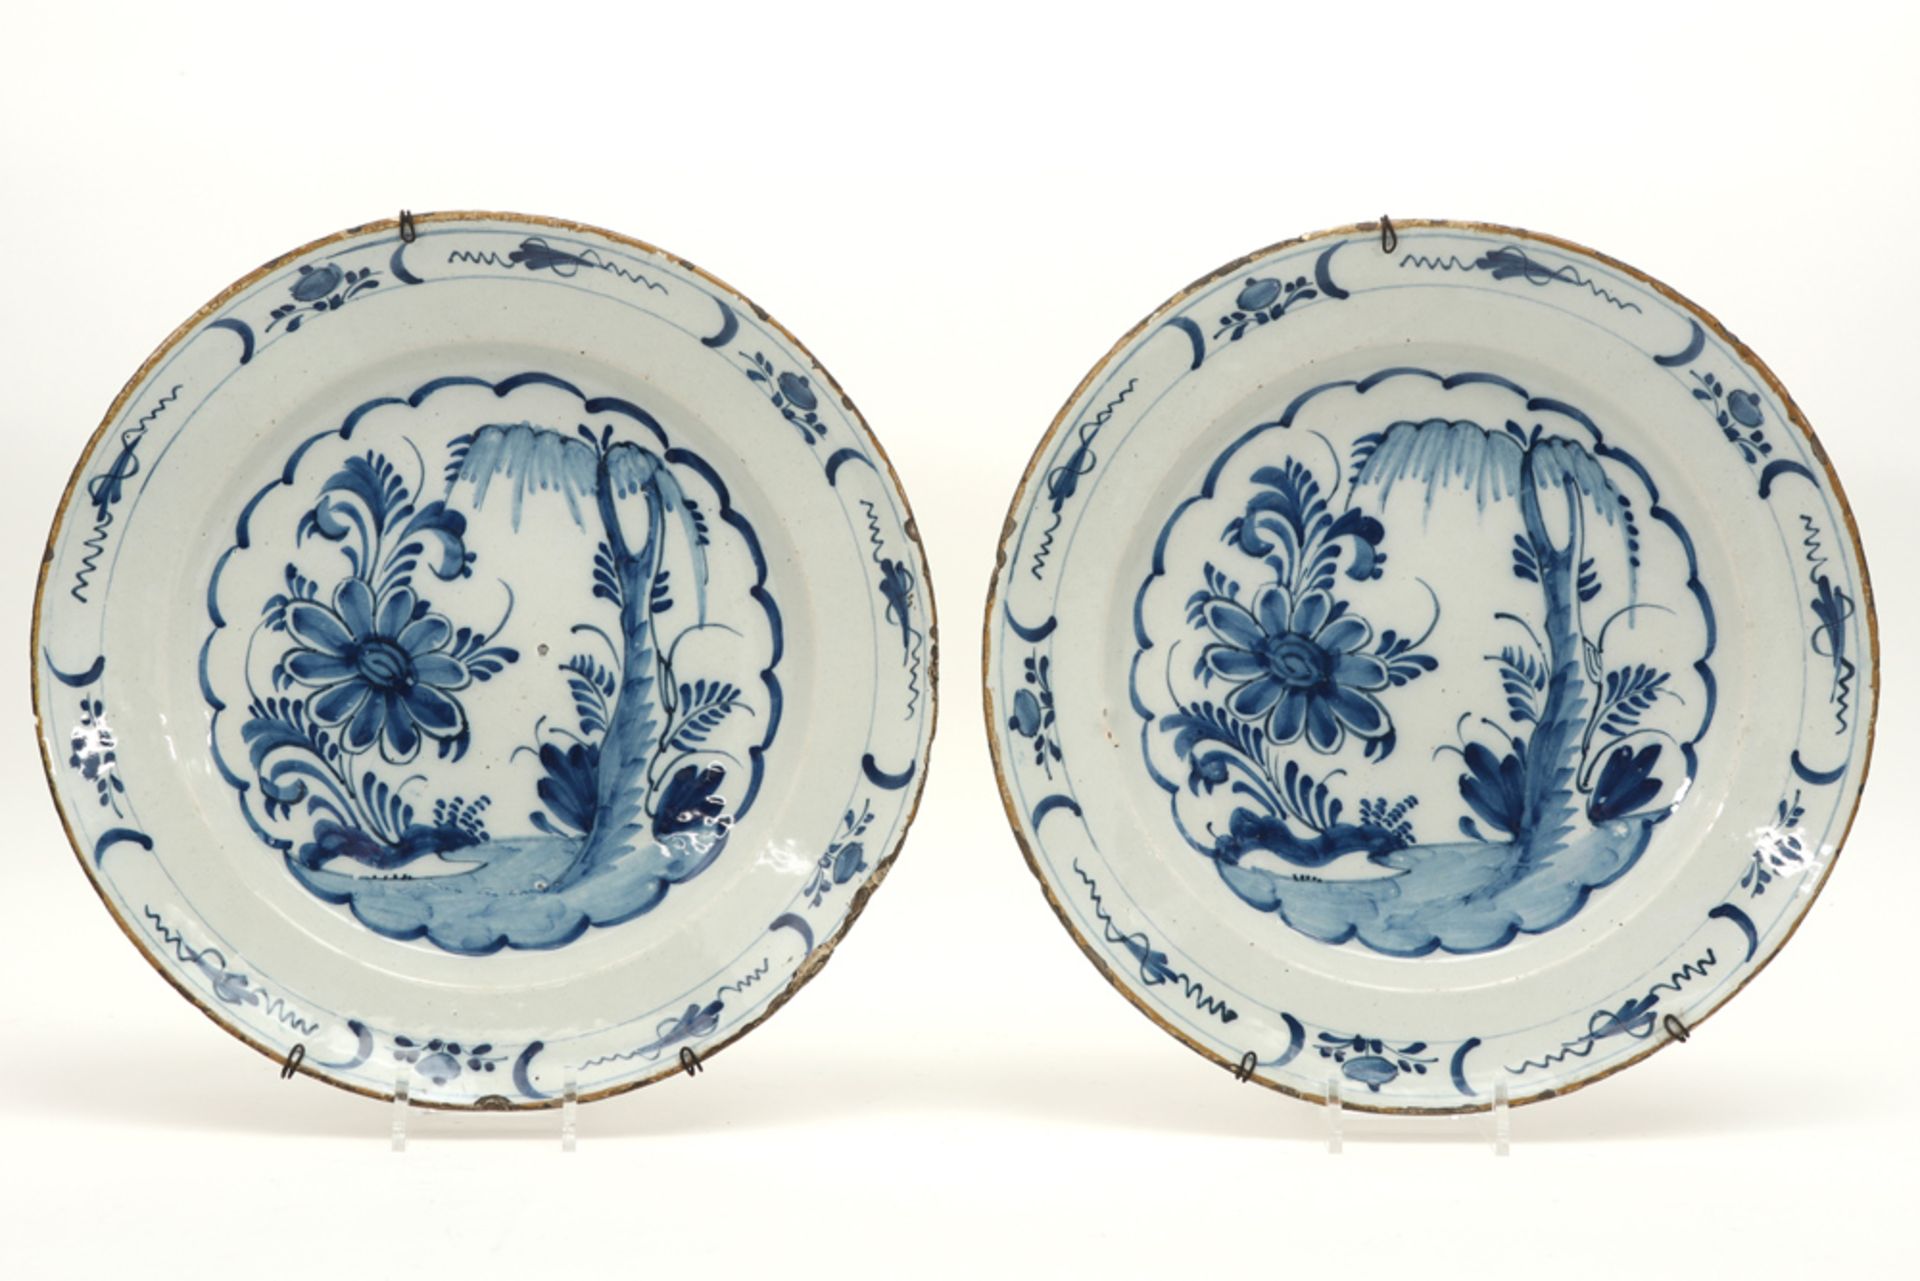 pair of 18th Cent. dishes in ceramic from Delft with a blue-white garden decor || Paar achttiende